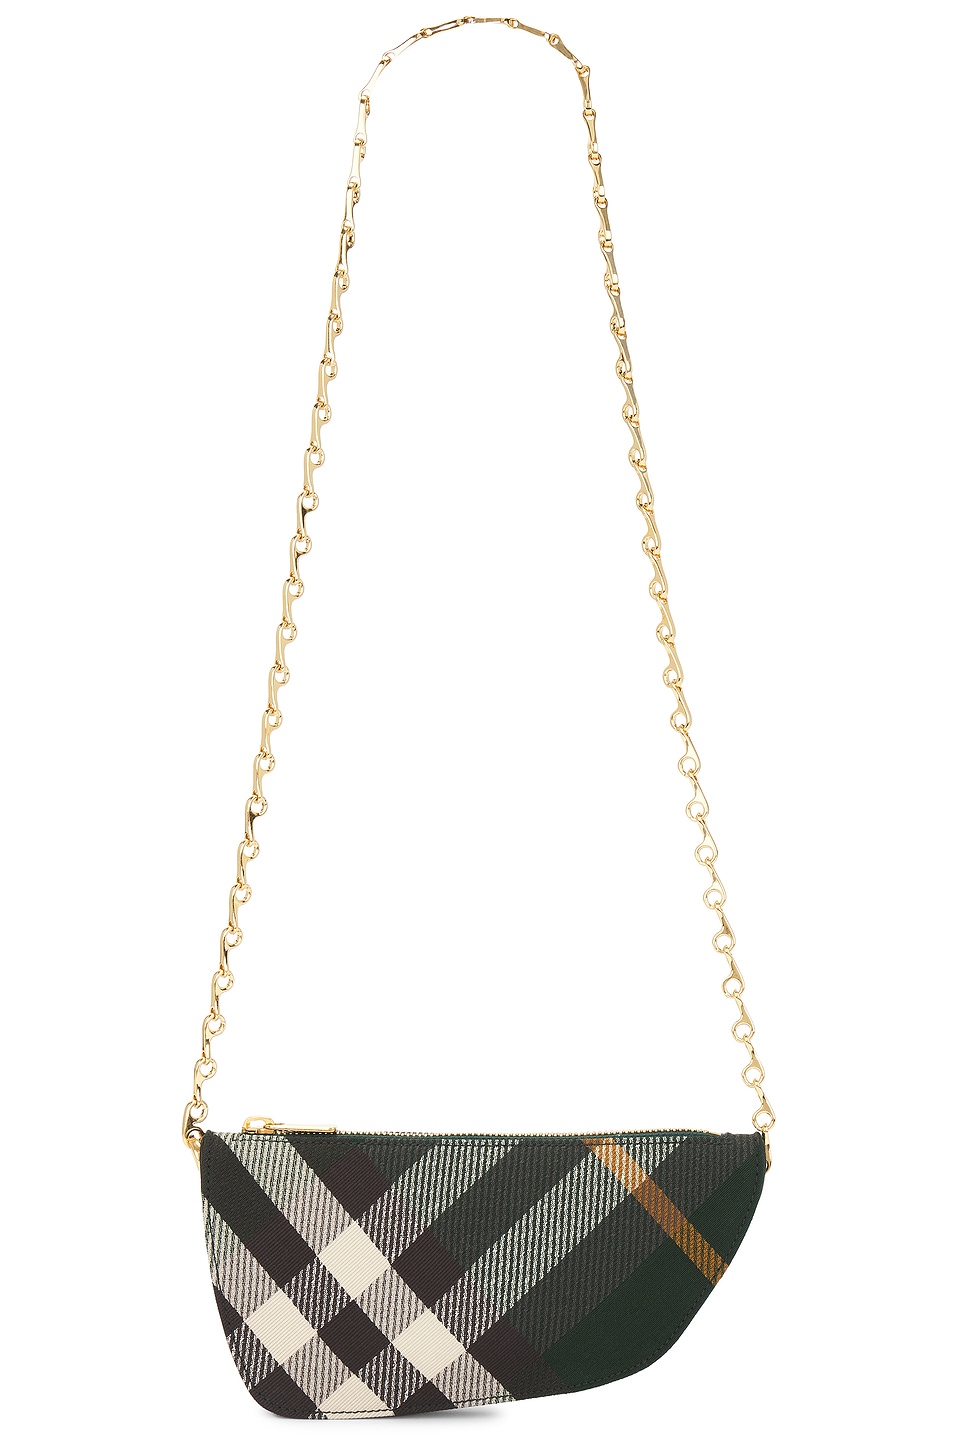 Burberry Micro Shield Bag With Chain in Green